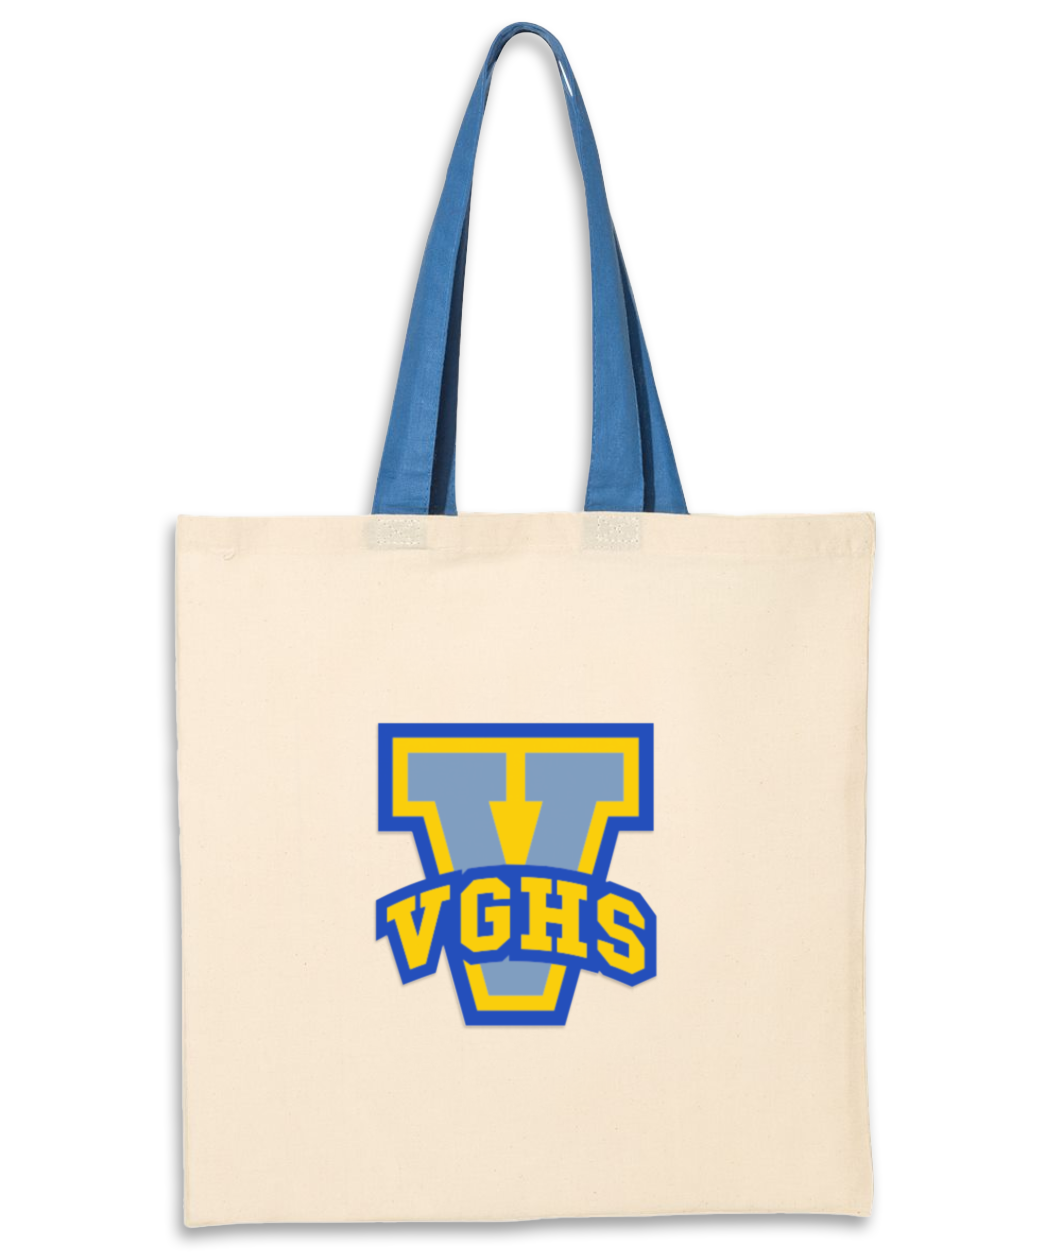 Natural colored tote with blue strap and V varsity letter emblem in yellow and blue with. bold letters 